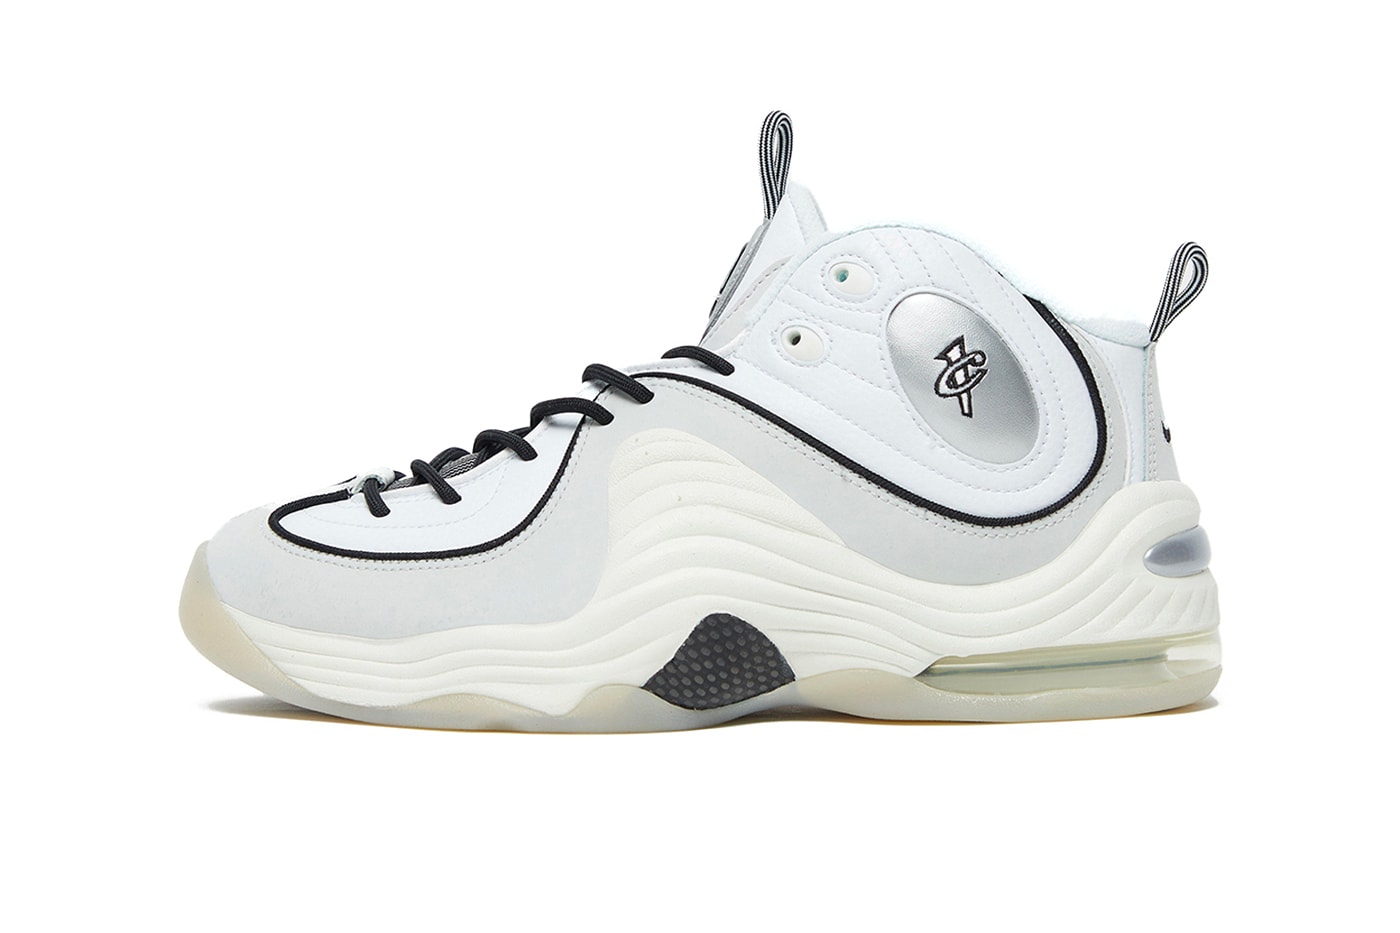 Nike Air Max Penny 2 emb first look white leather black chrome release info date price